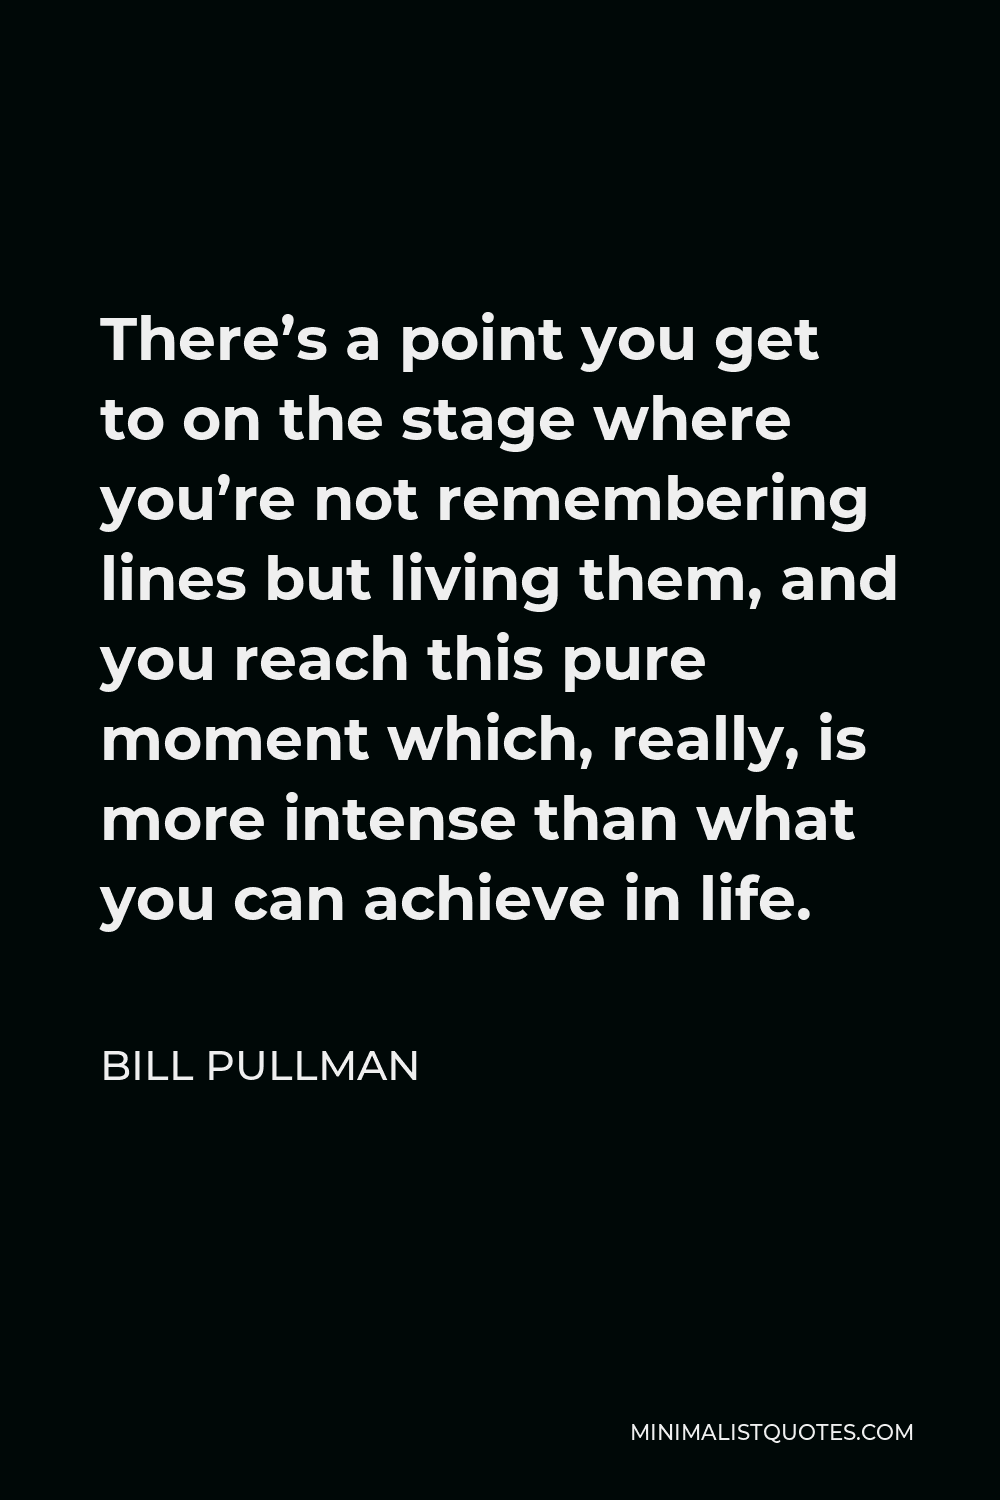 Bill Pullman Quote - There’s a point you get to on the stage where you’re not remembering lines but living them, and you reach this pure moment which, really, is more intense than what you can achieve in life.